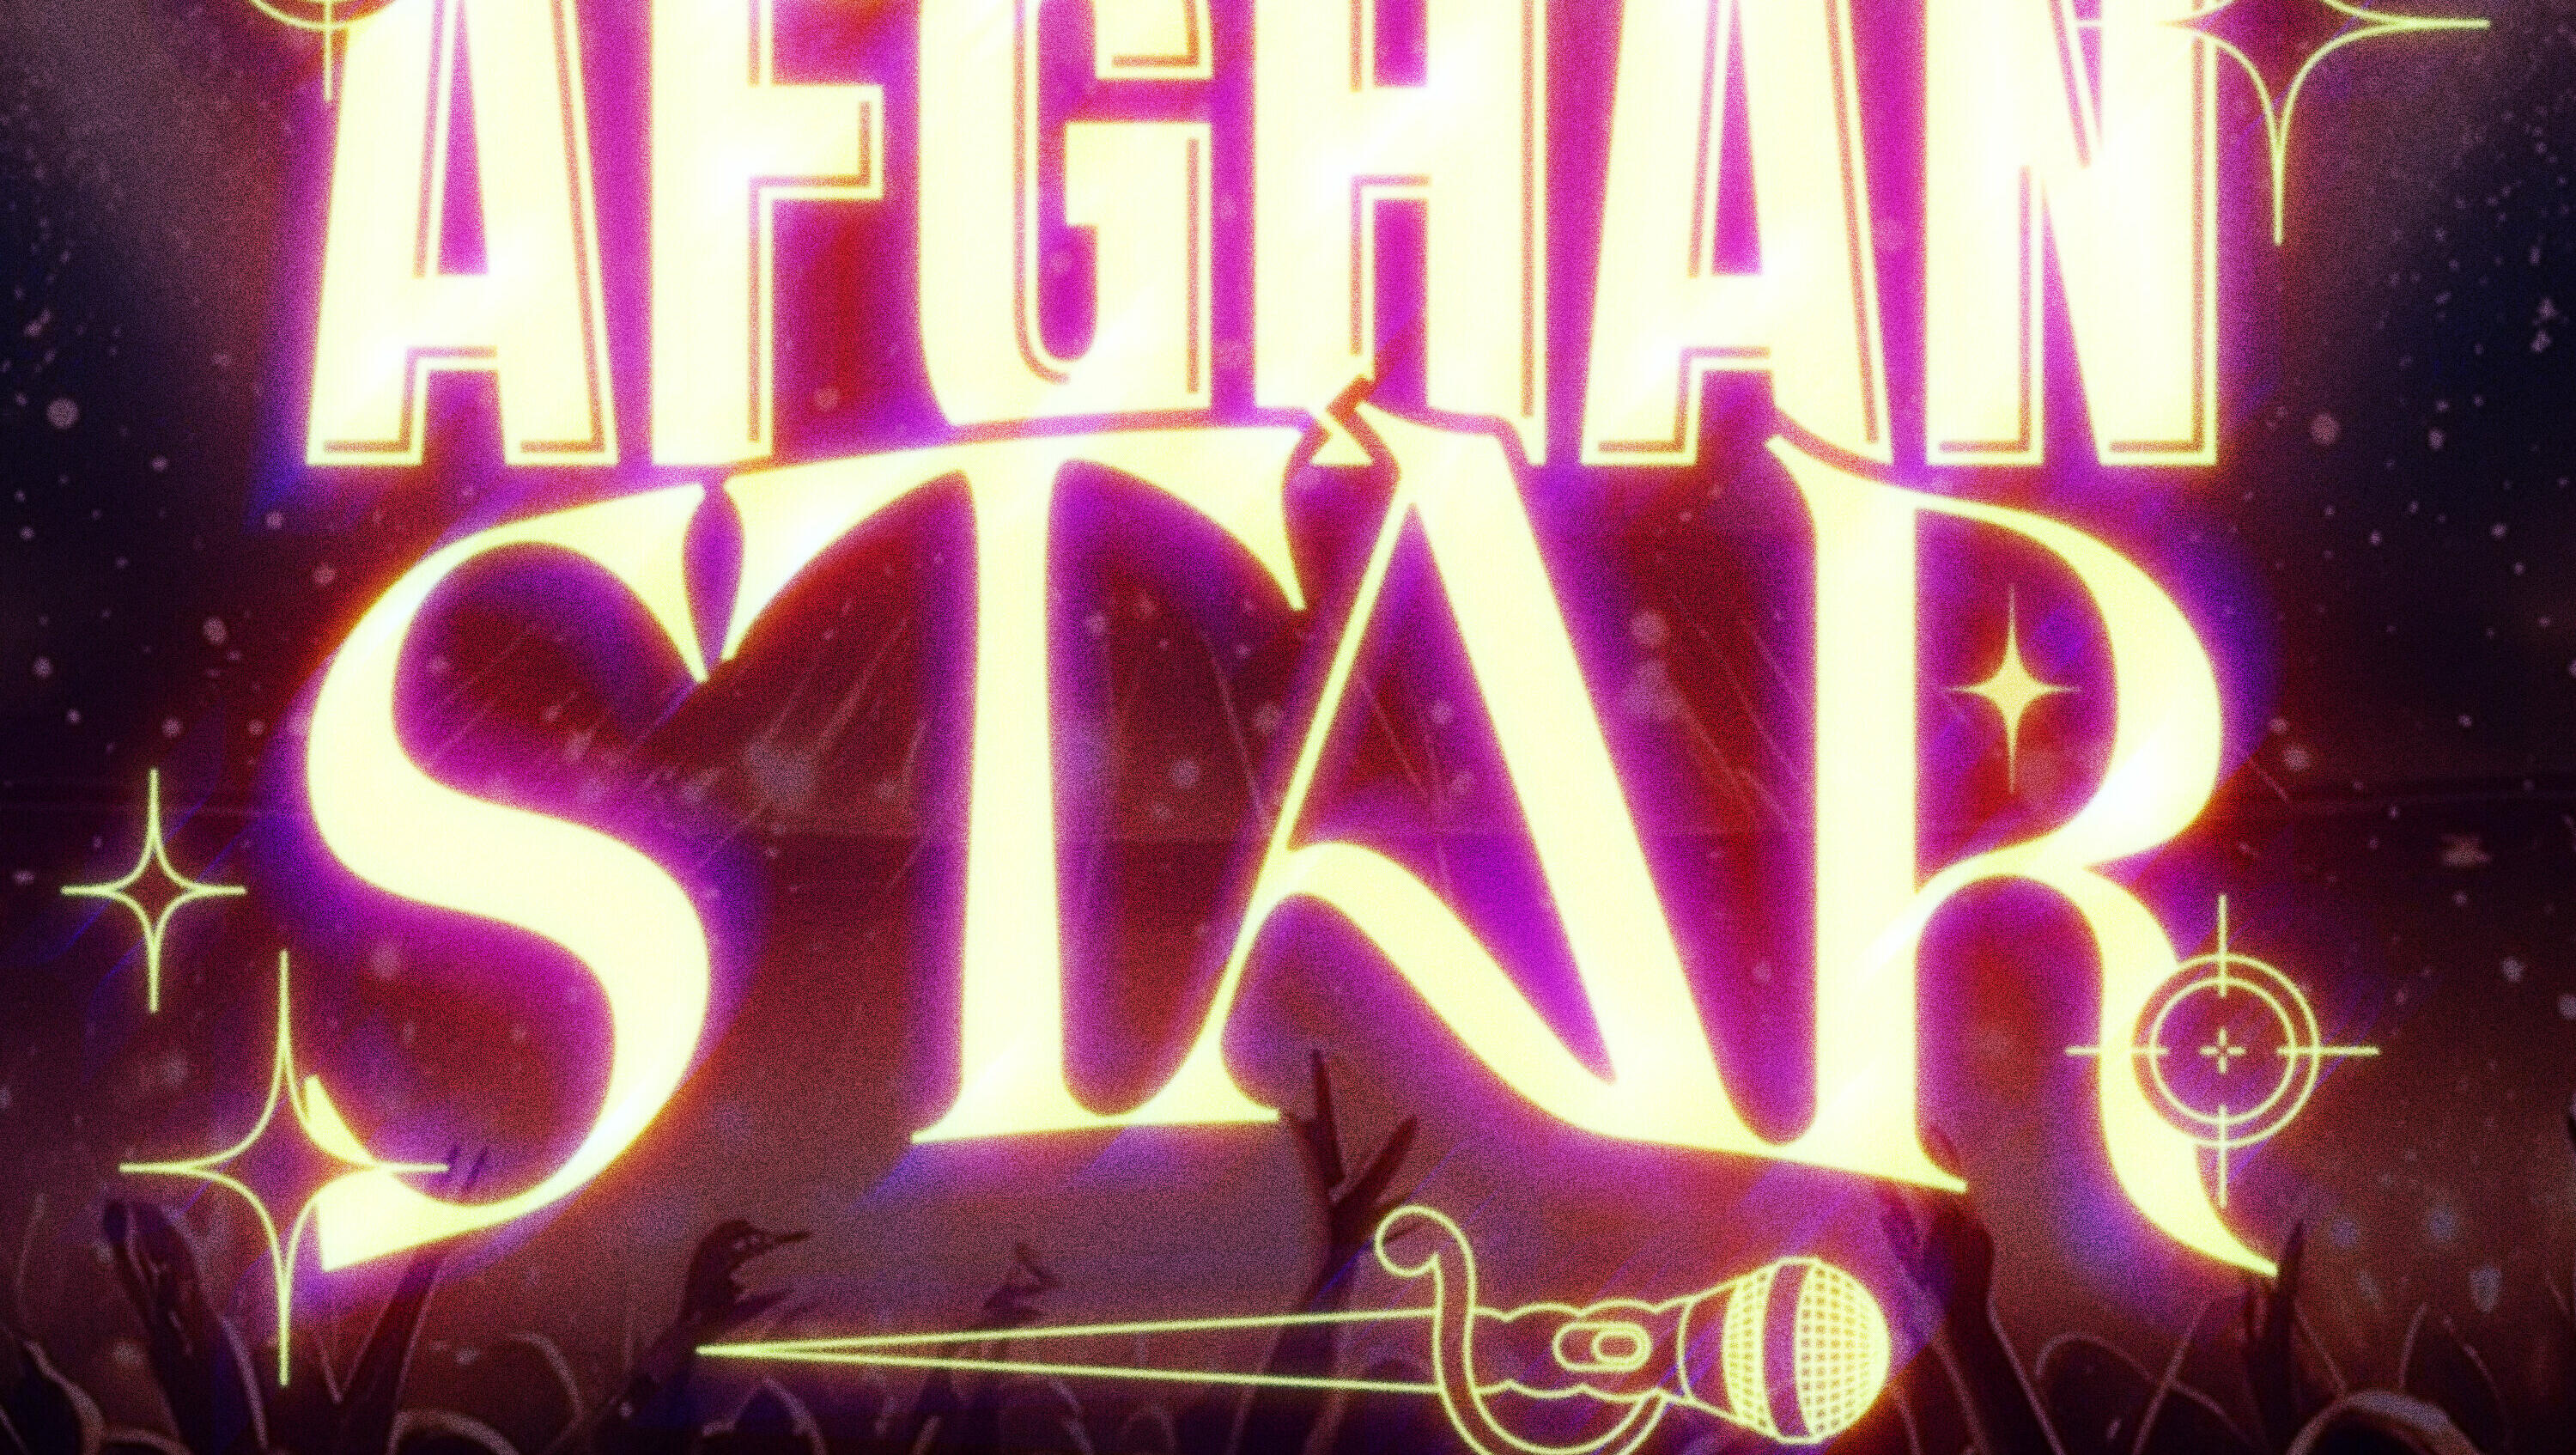 Introducing: Afghan Star, hosted by John Legend